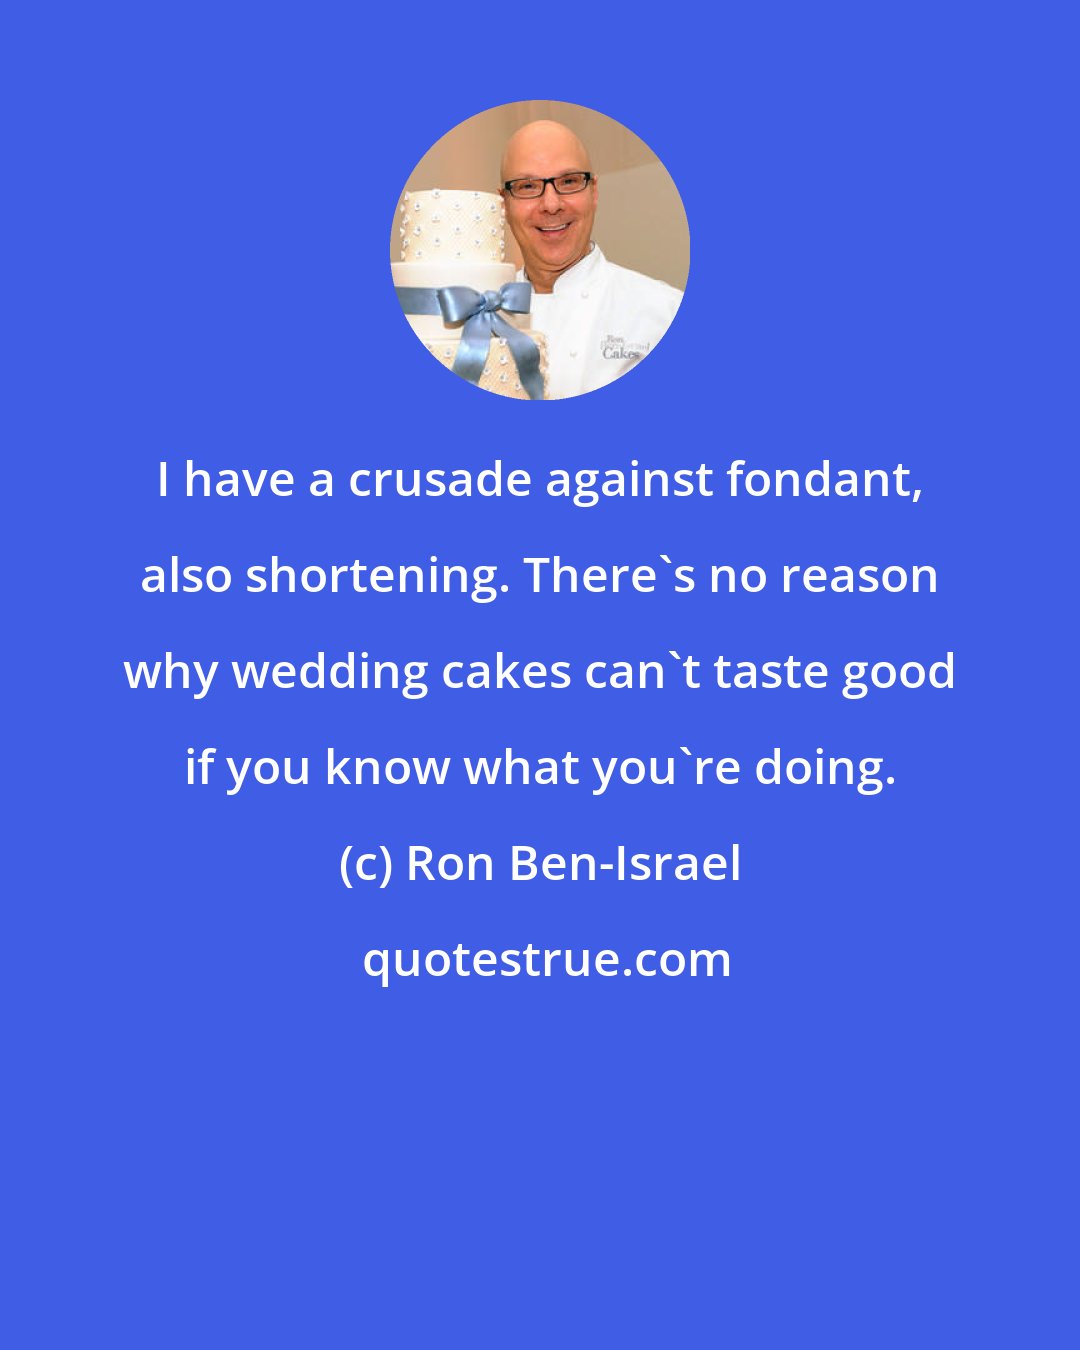 Ron Ben-Israel: I have a crusade against fondant, also shortening. There's no reason why wedding cakes can't taste good if you know what you're doing.